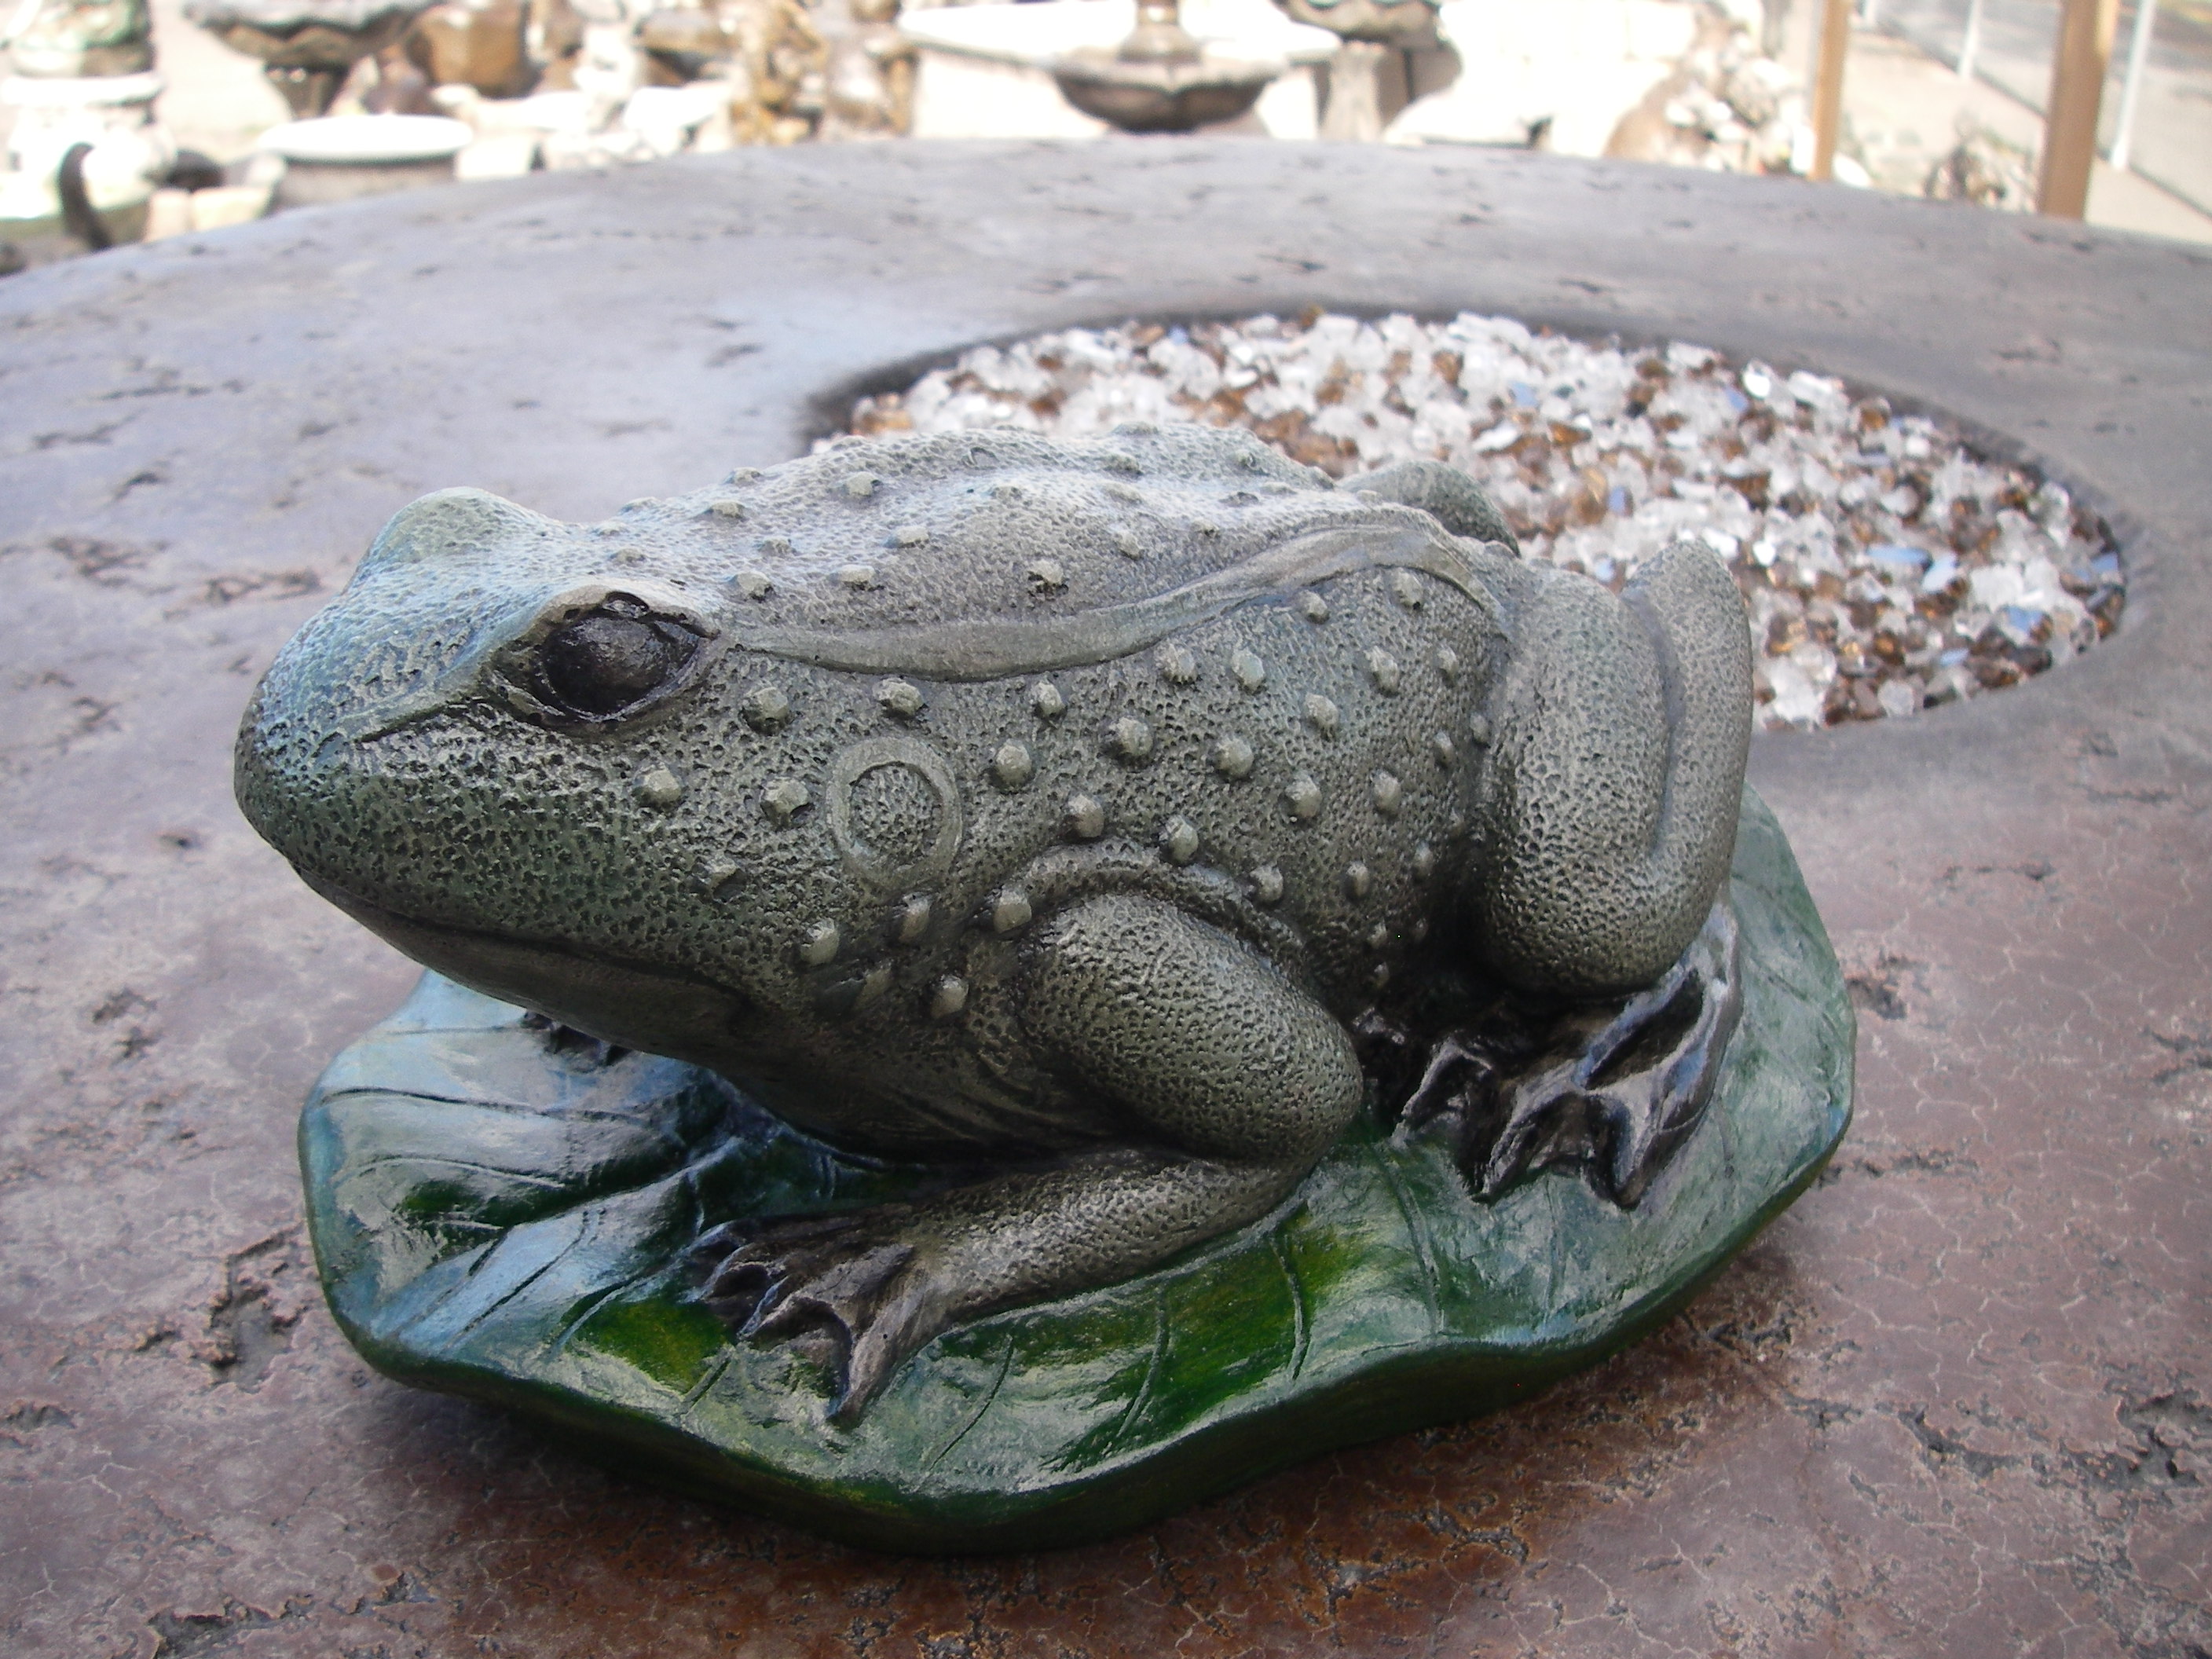 Bull Frog - mouth closed